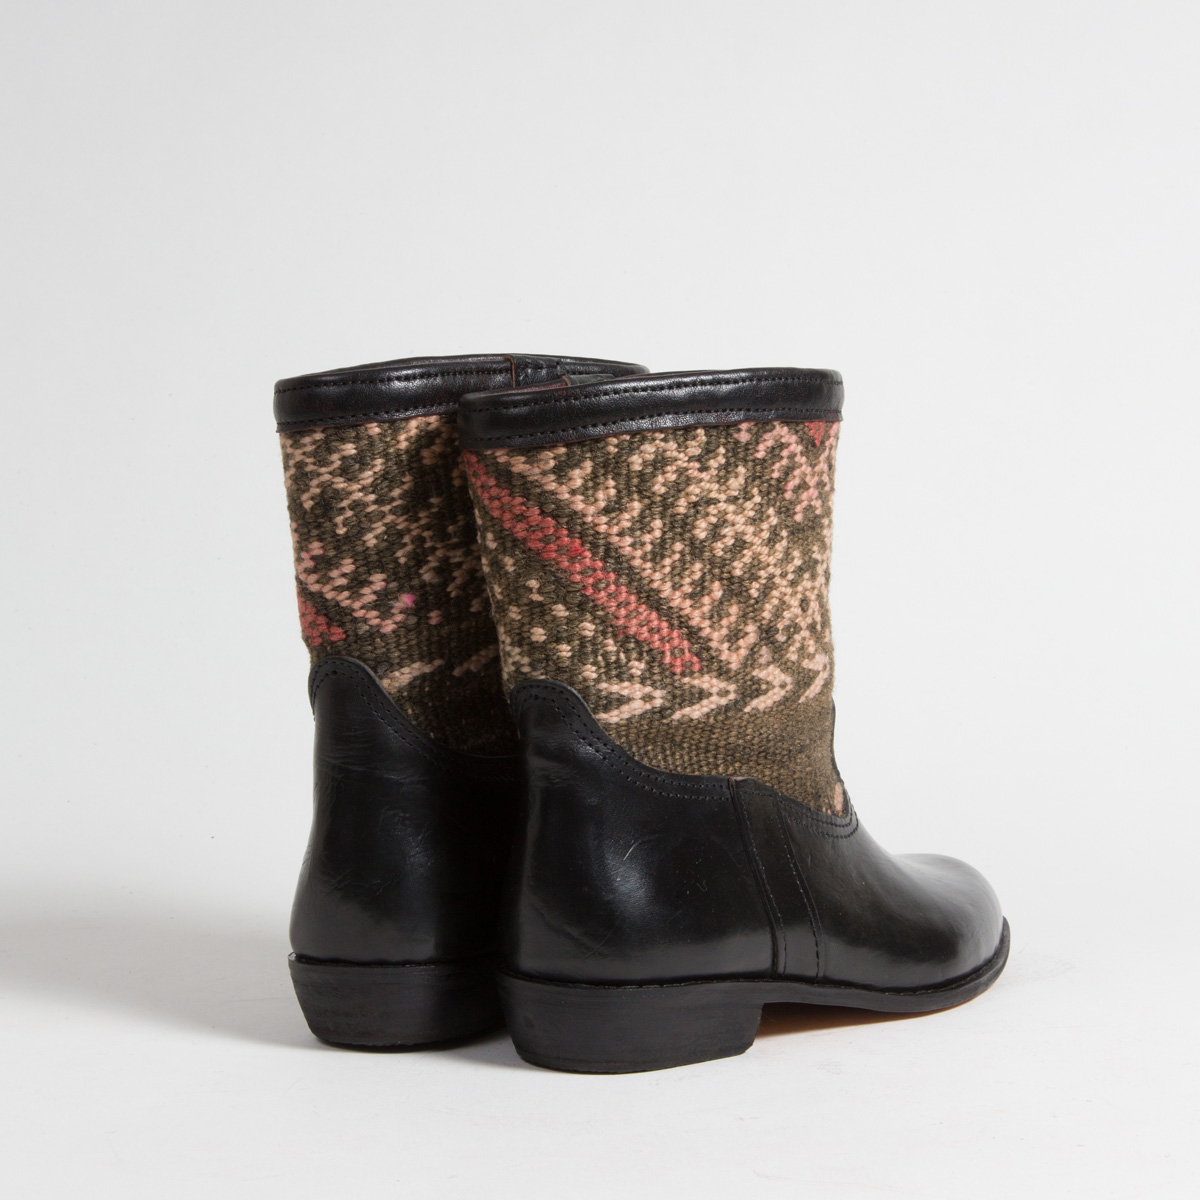 Bottines Kilim cuir mababouche artisanales (Réf. RPN29-41)